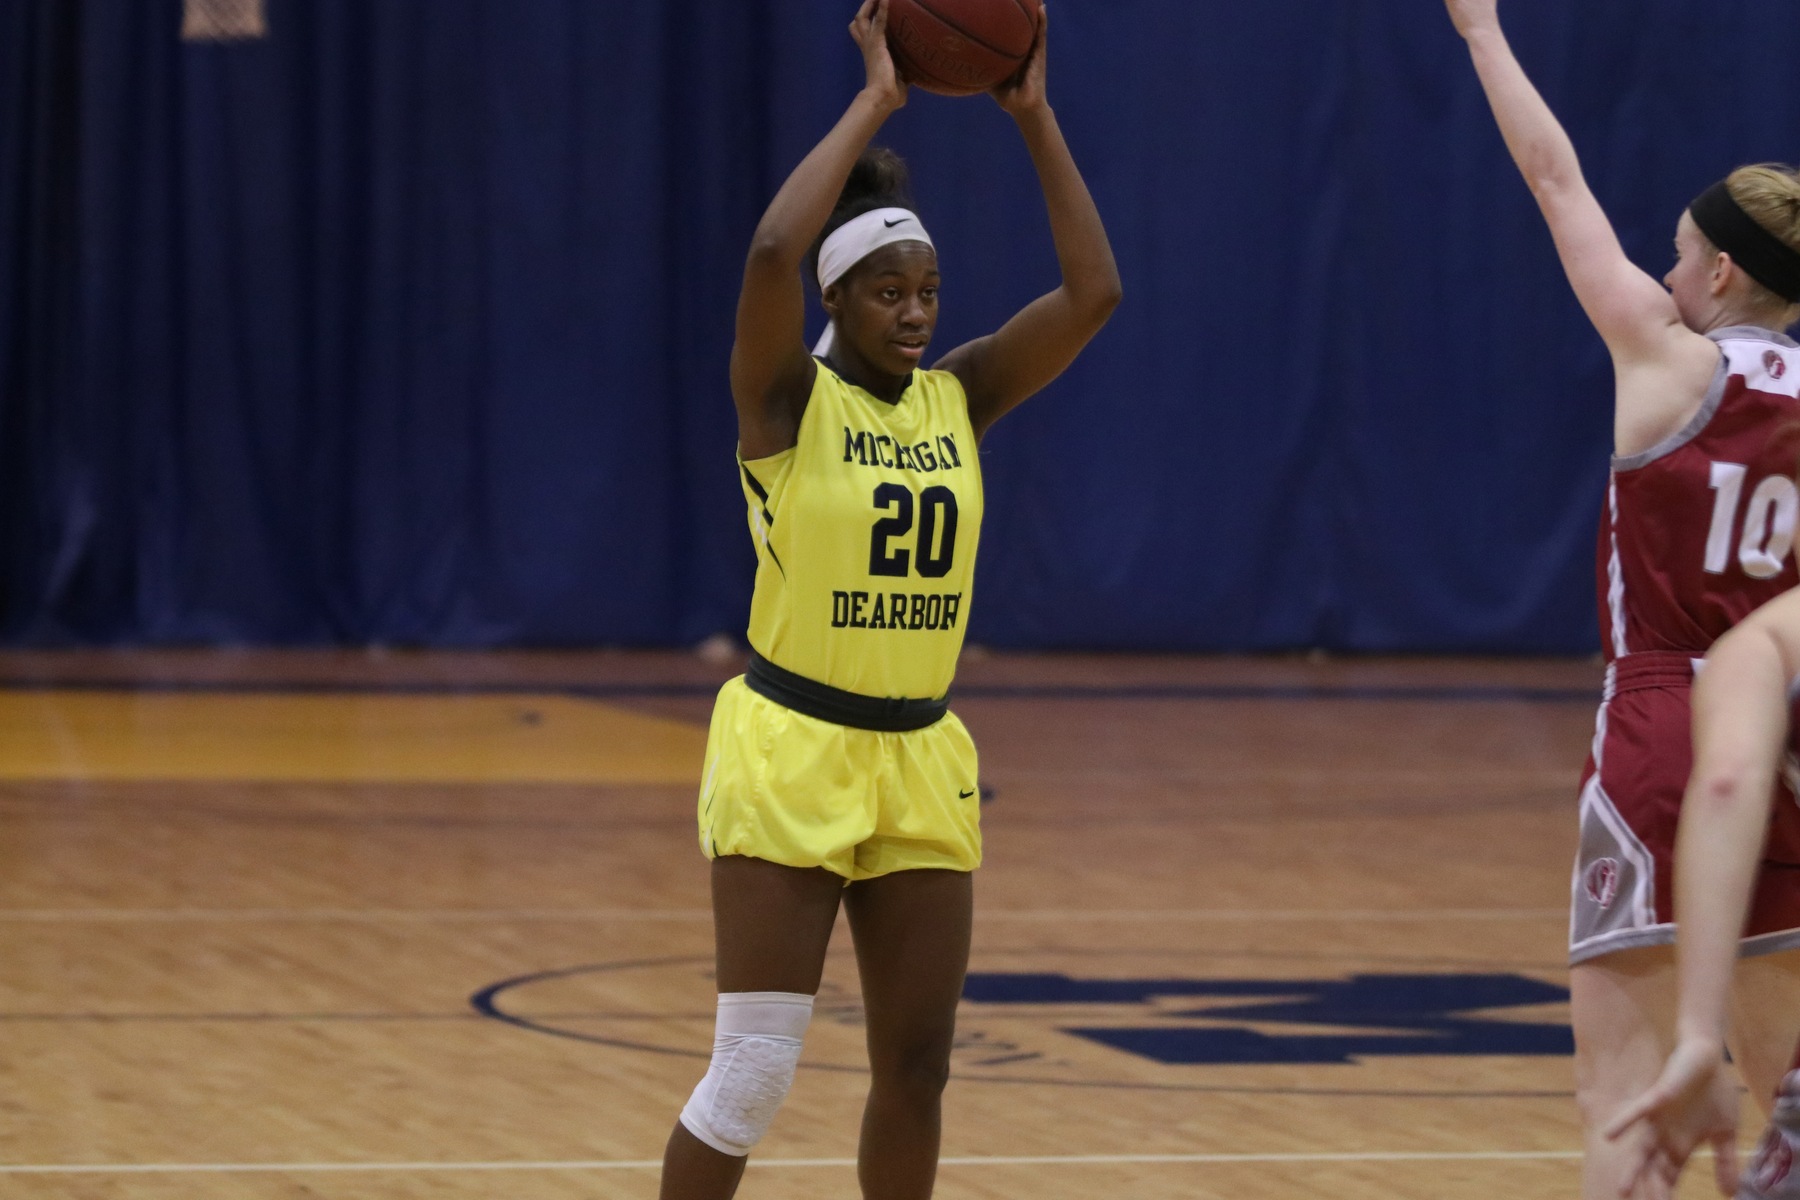 Wolverines fall short in WHAC quarterfinals to Rochester